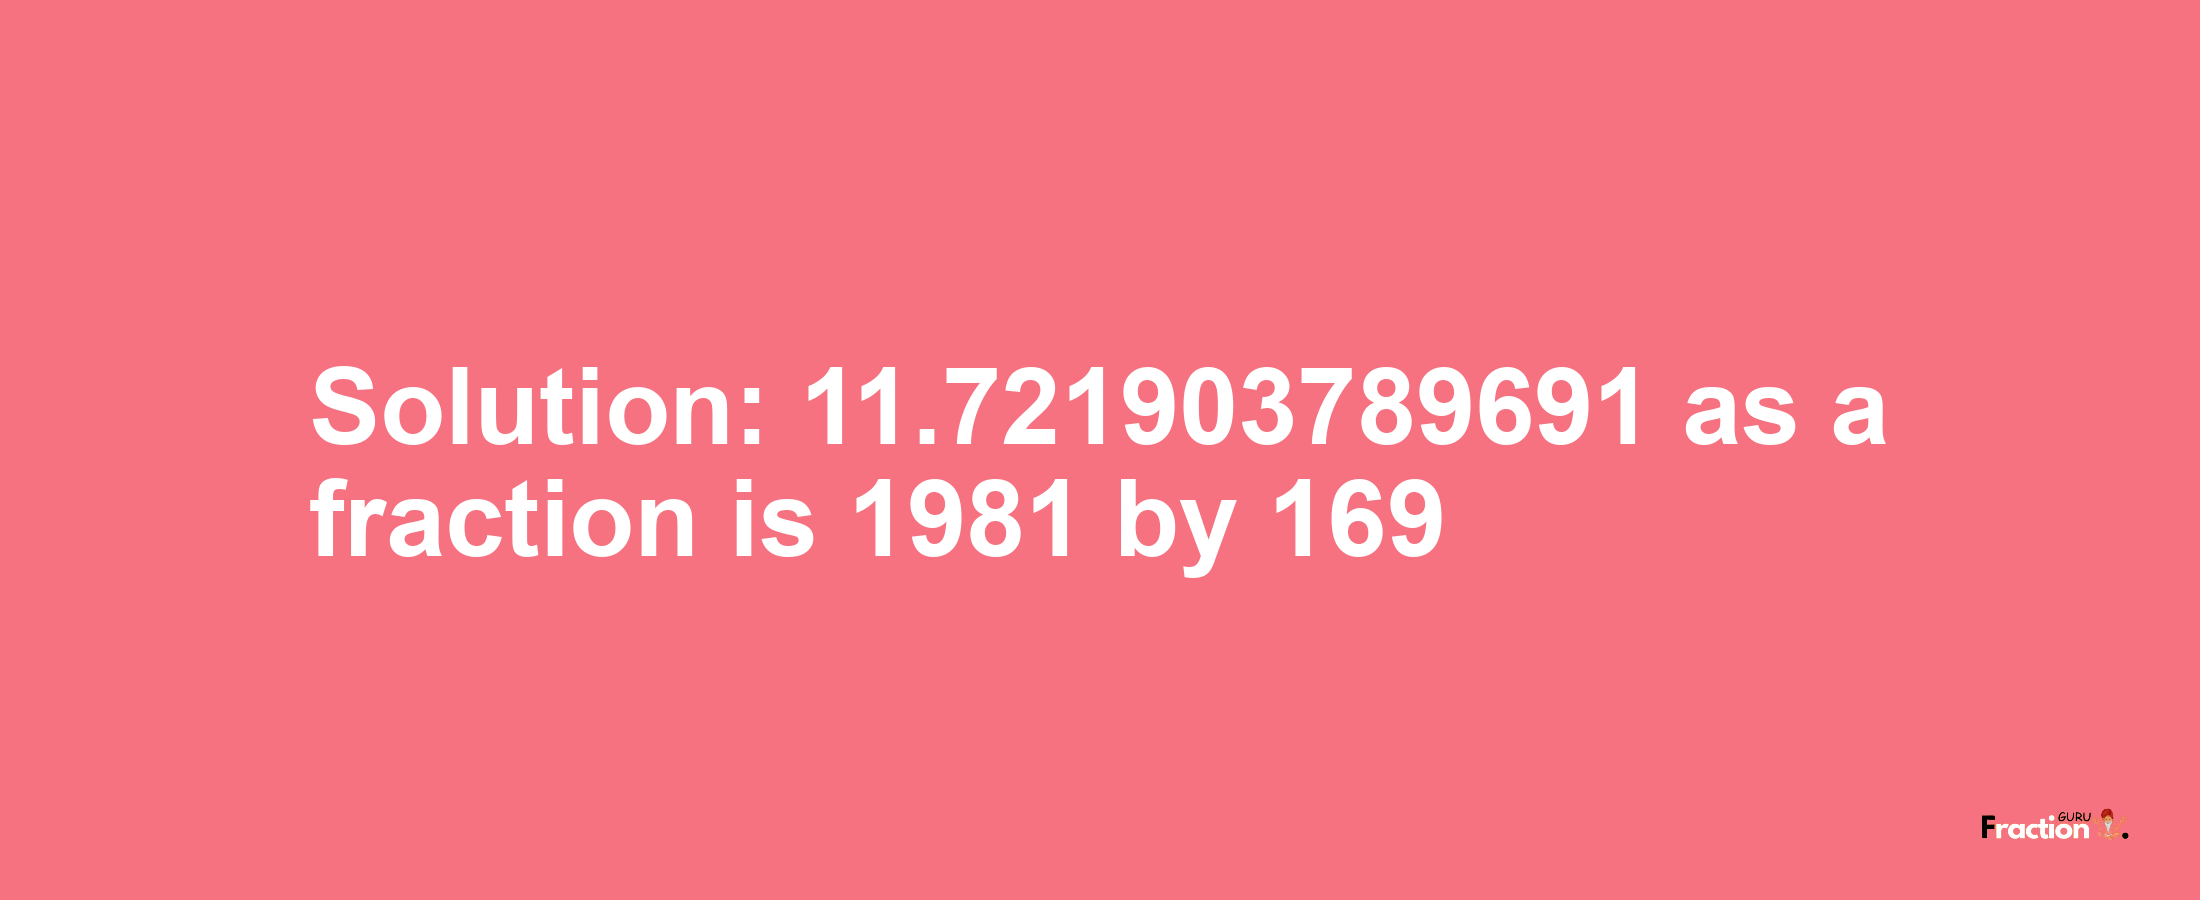 Solution:11.721903789691 as a fraction is 1981/169